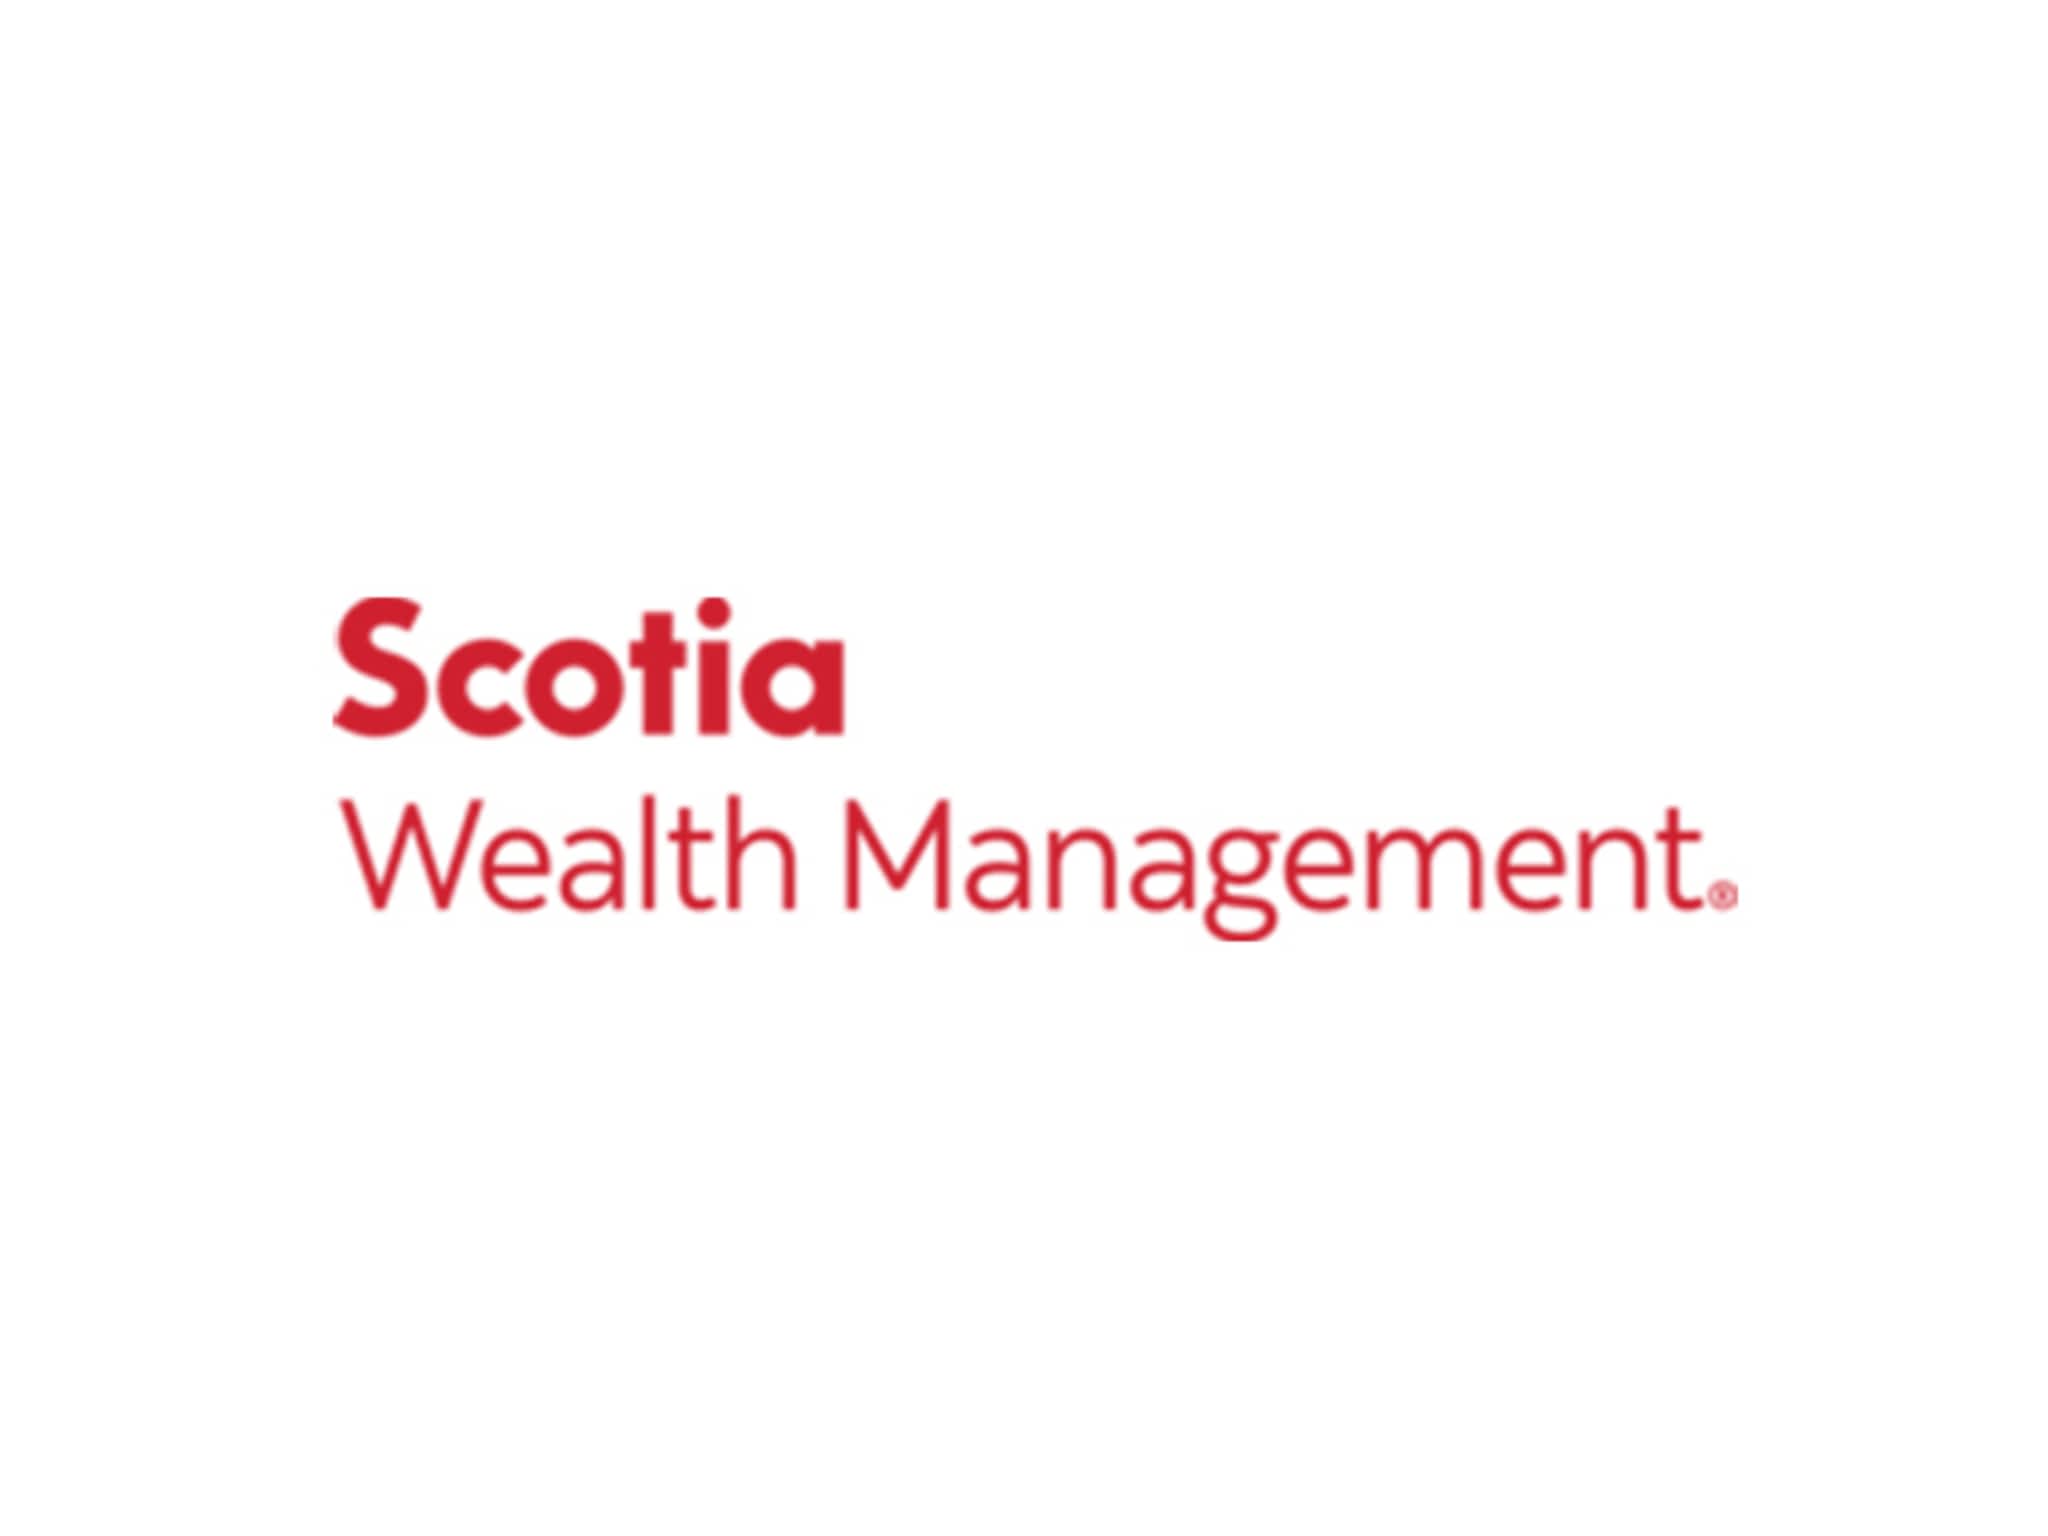 photo D Nay Stockbrugger - Scotia Wealth Insurance Services - Scotia Wealth Management